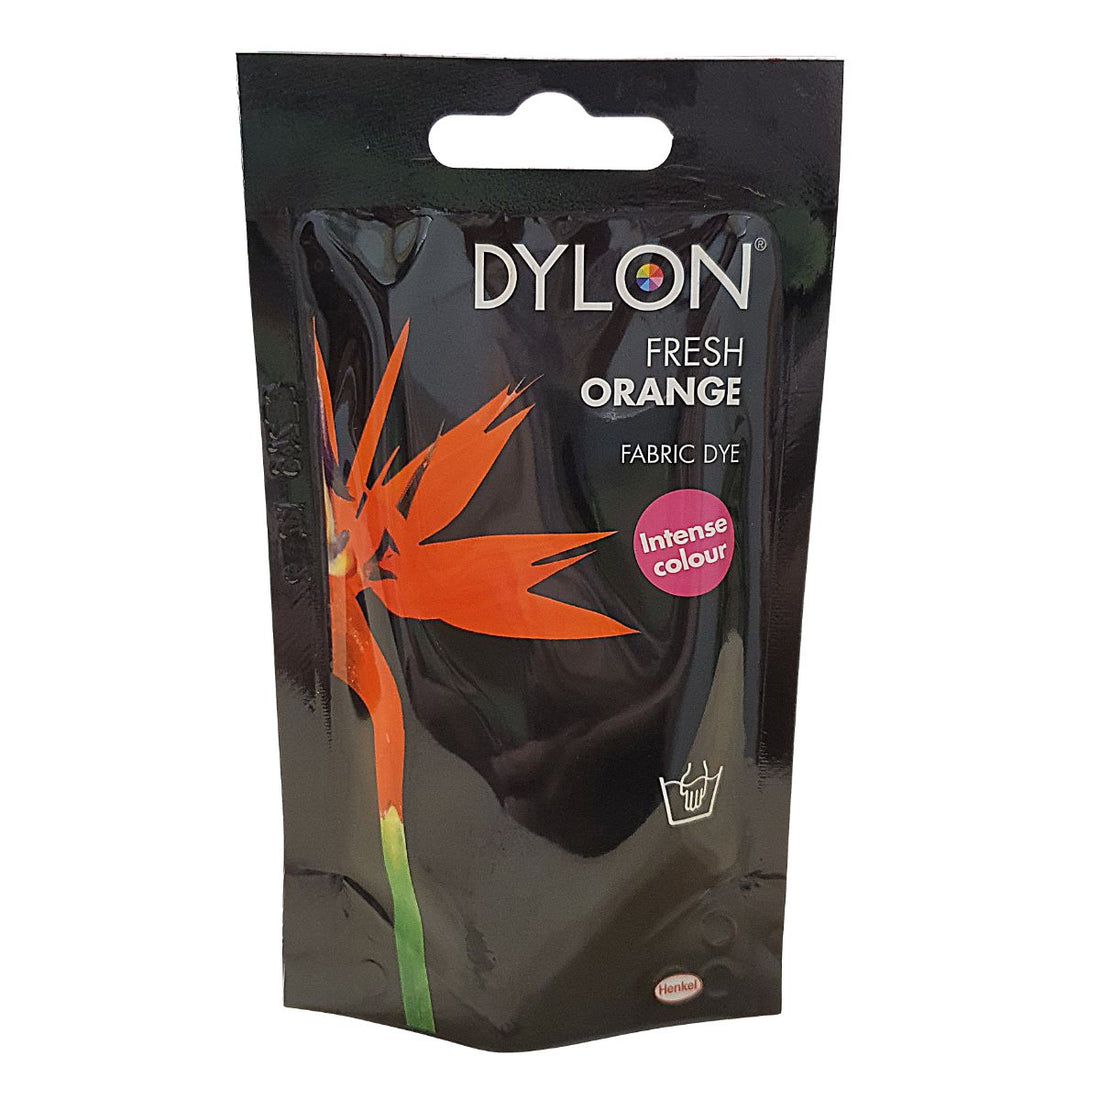 50g PACK DYLON FABRIC CLOTHES HAND WASH DYE COLOURING CHANGING COLOUR TO  CHOOSE